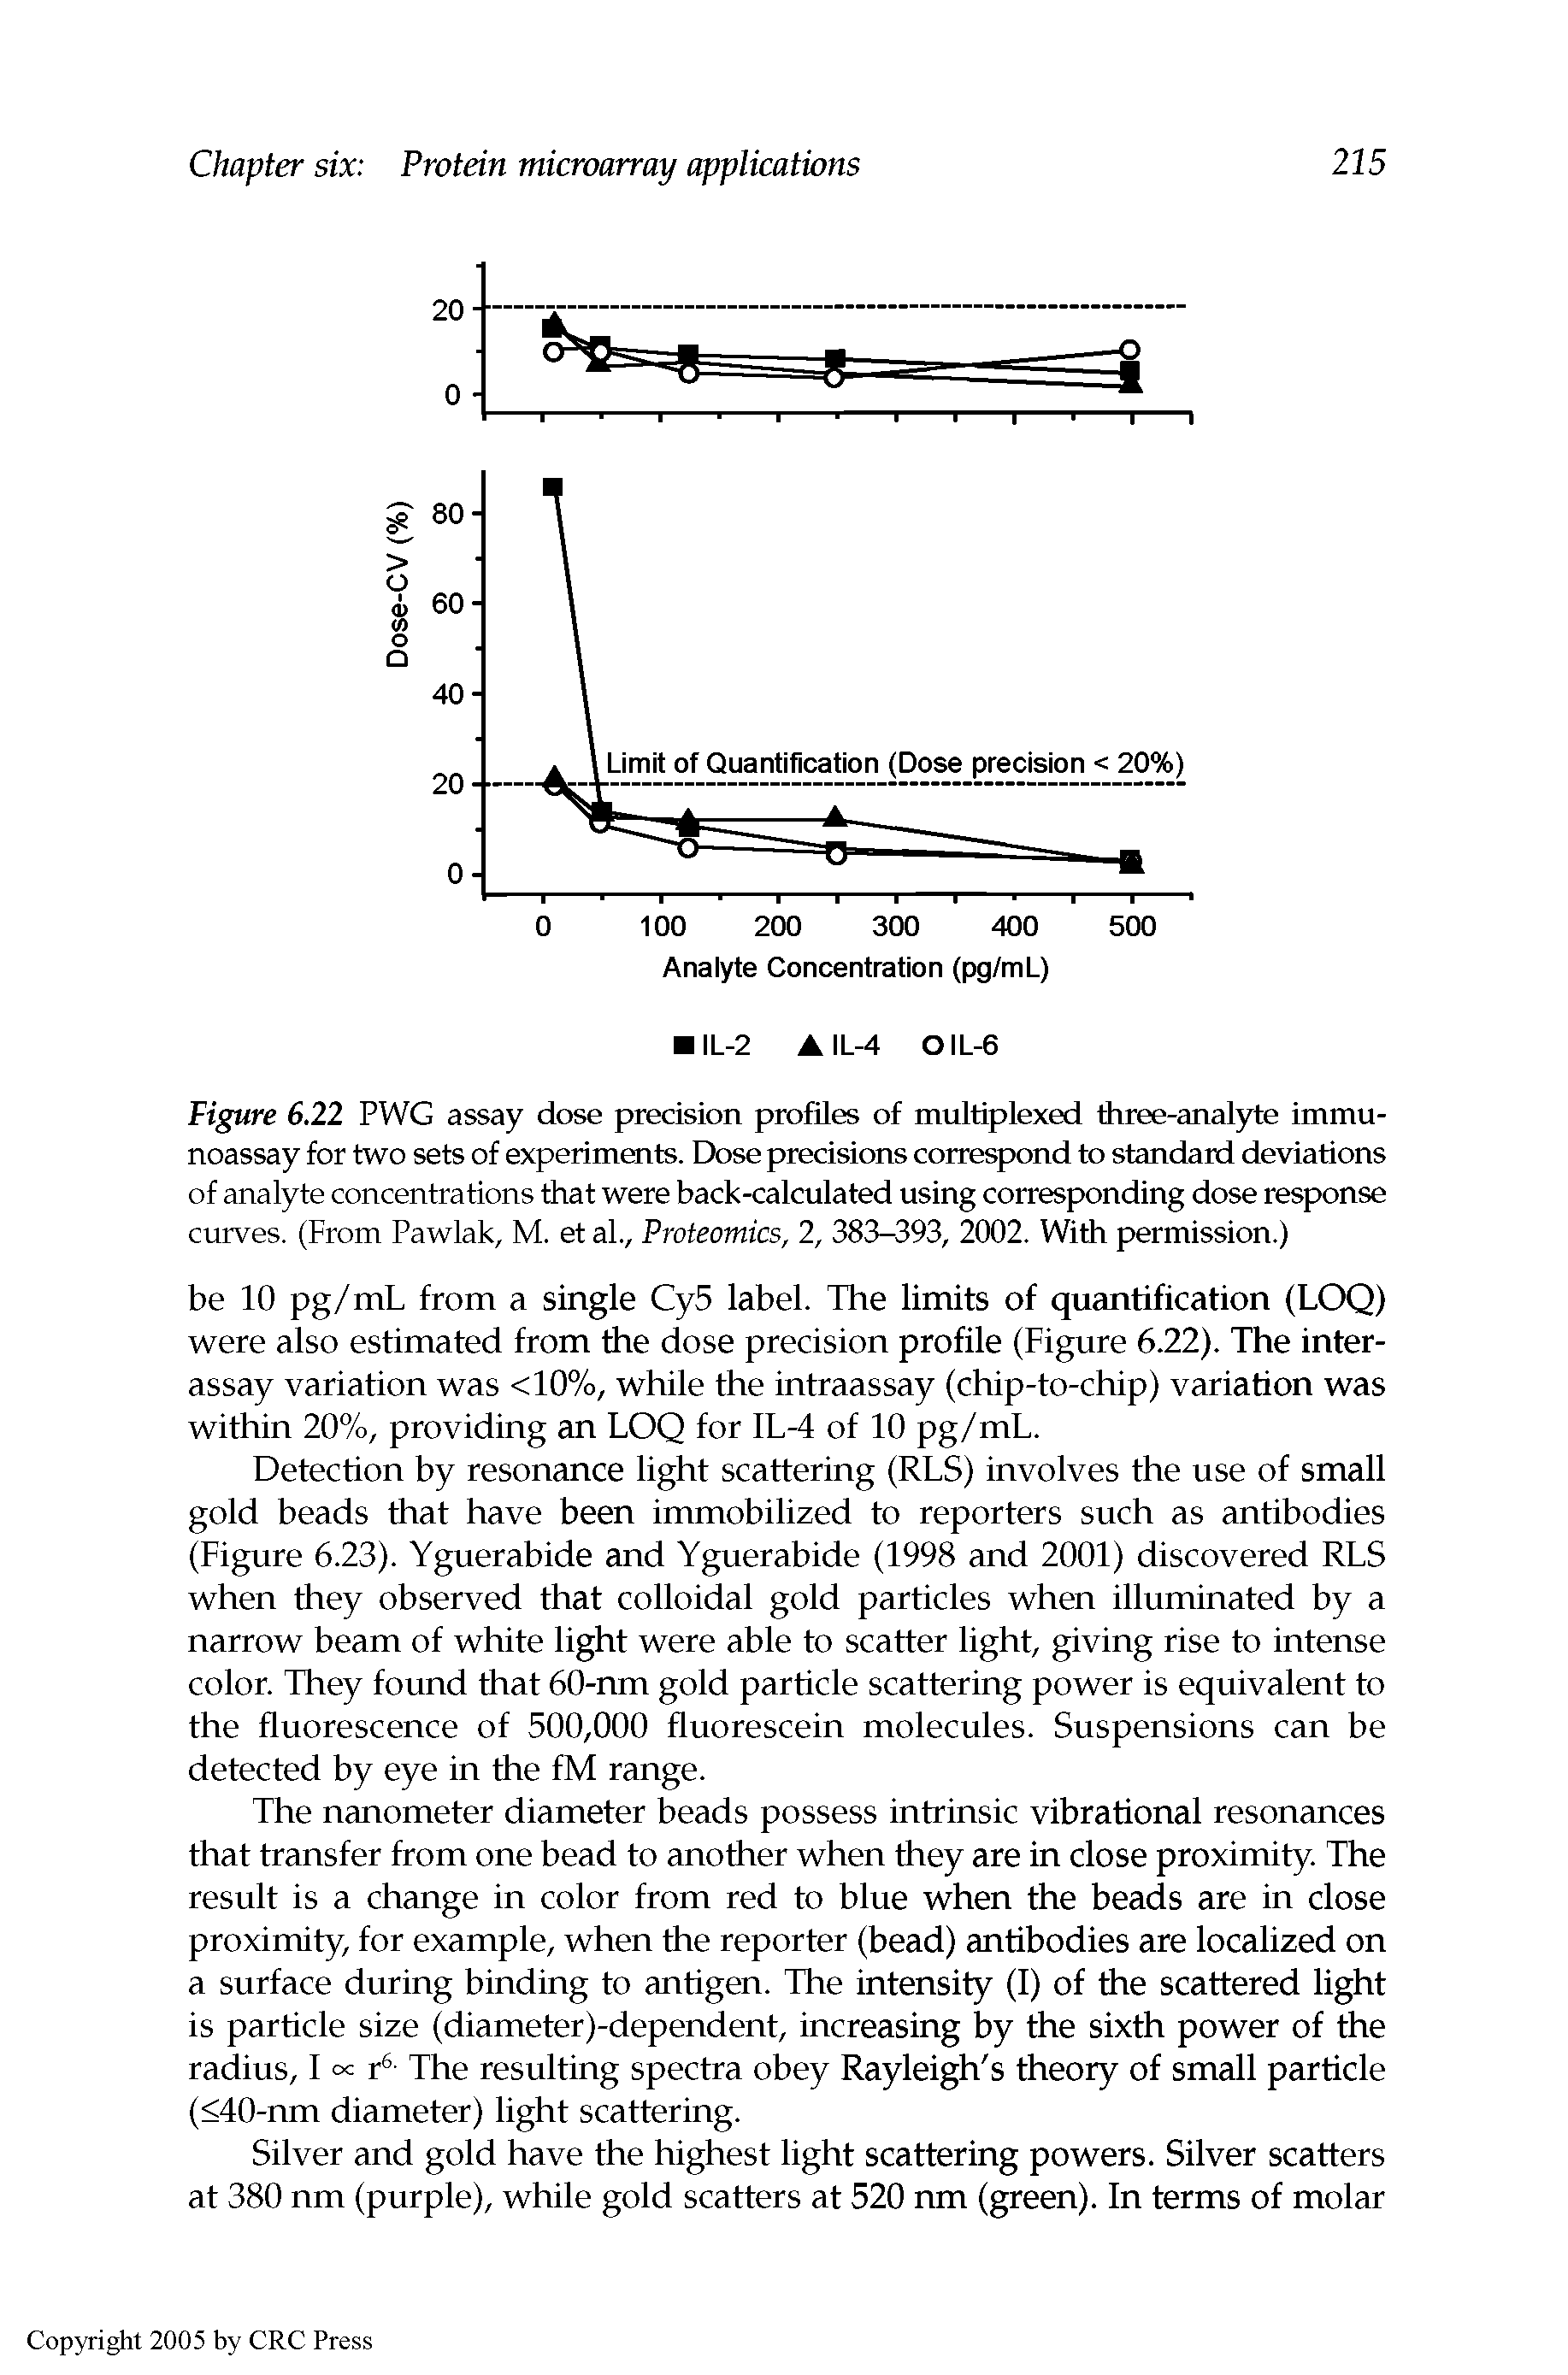 Figure 6.22 PWG assay dose precision profiles of multiplexed three-analyte immunoassay for two sets of experiments. Dose precisions correspond to standard deviations of analyte concentrations that were back-calculated using corresponding dose response curves. (From Pawlak, M. et al., Proteomics, 2, 383-393, 2002. With permission.)...